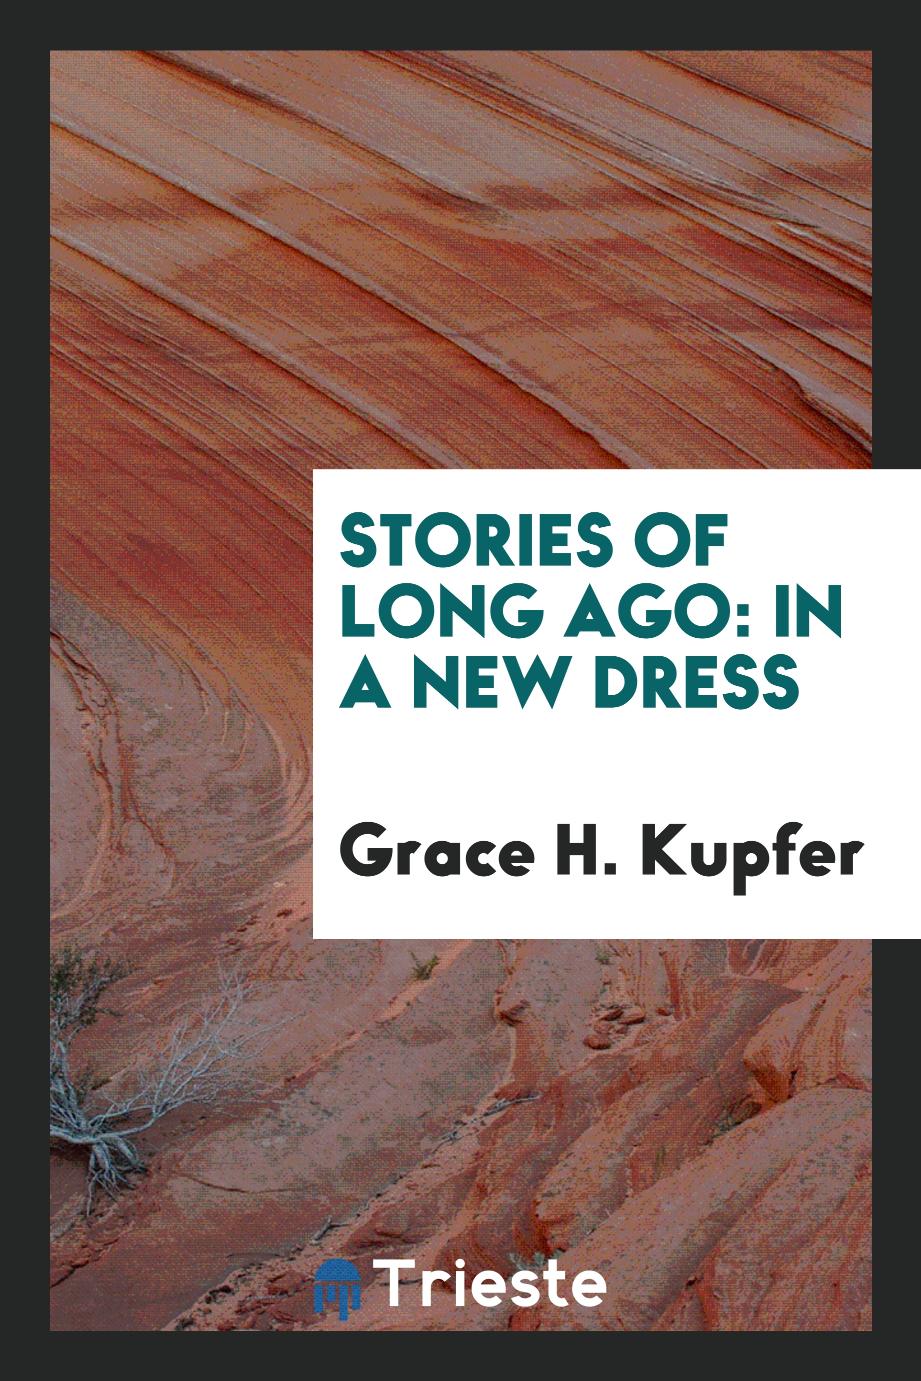 Stories of long ago: in a new dress